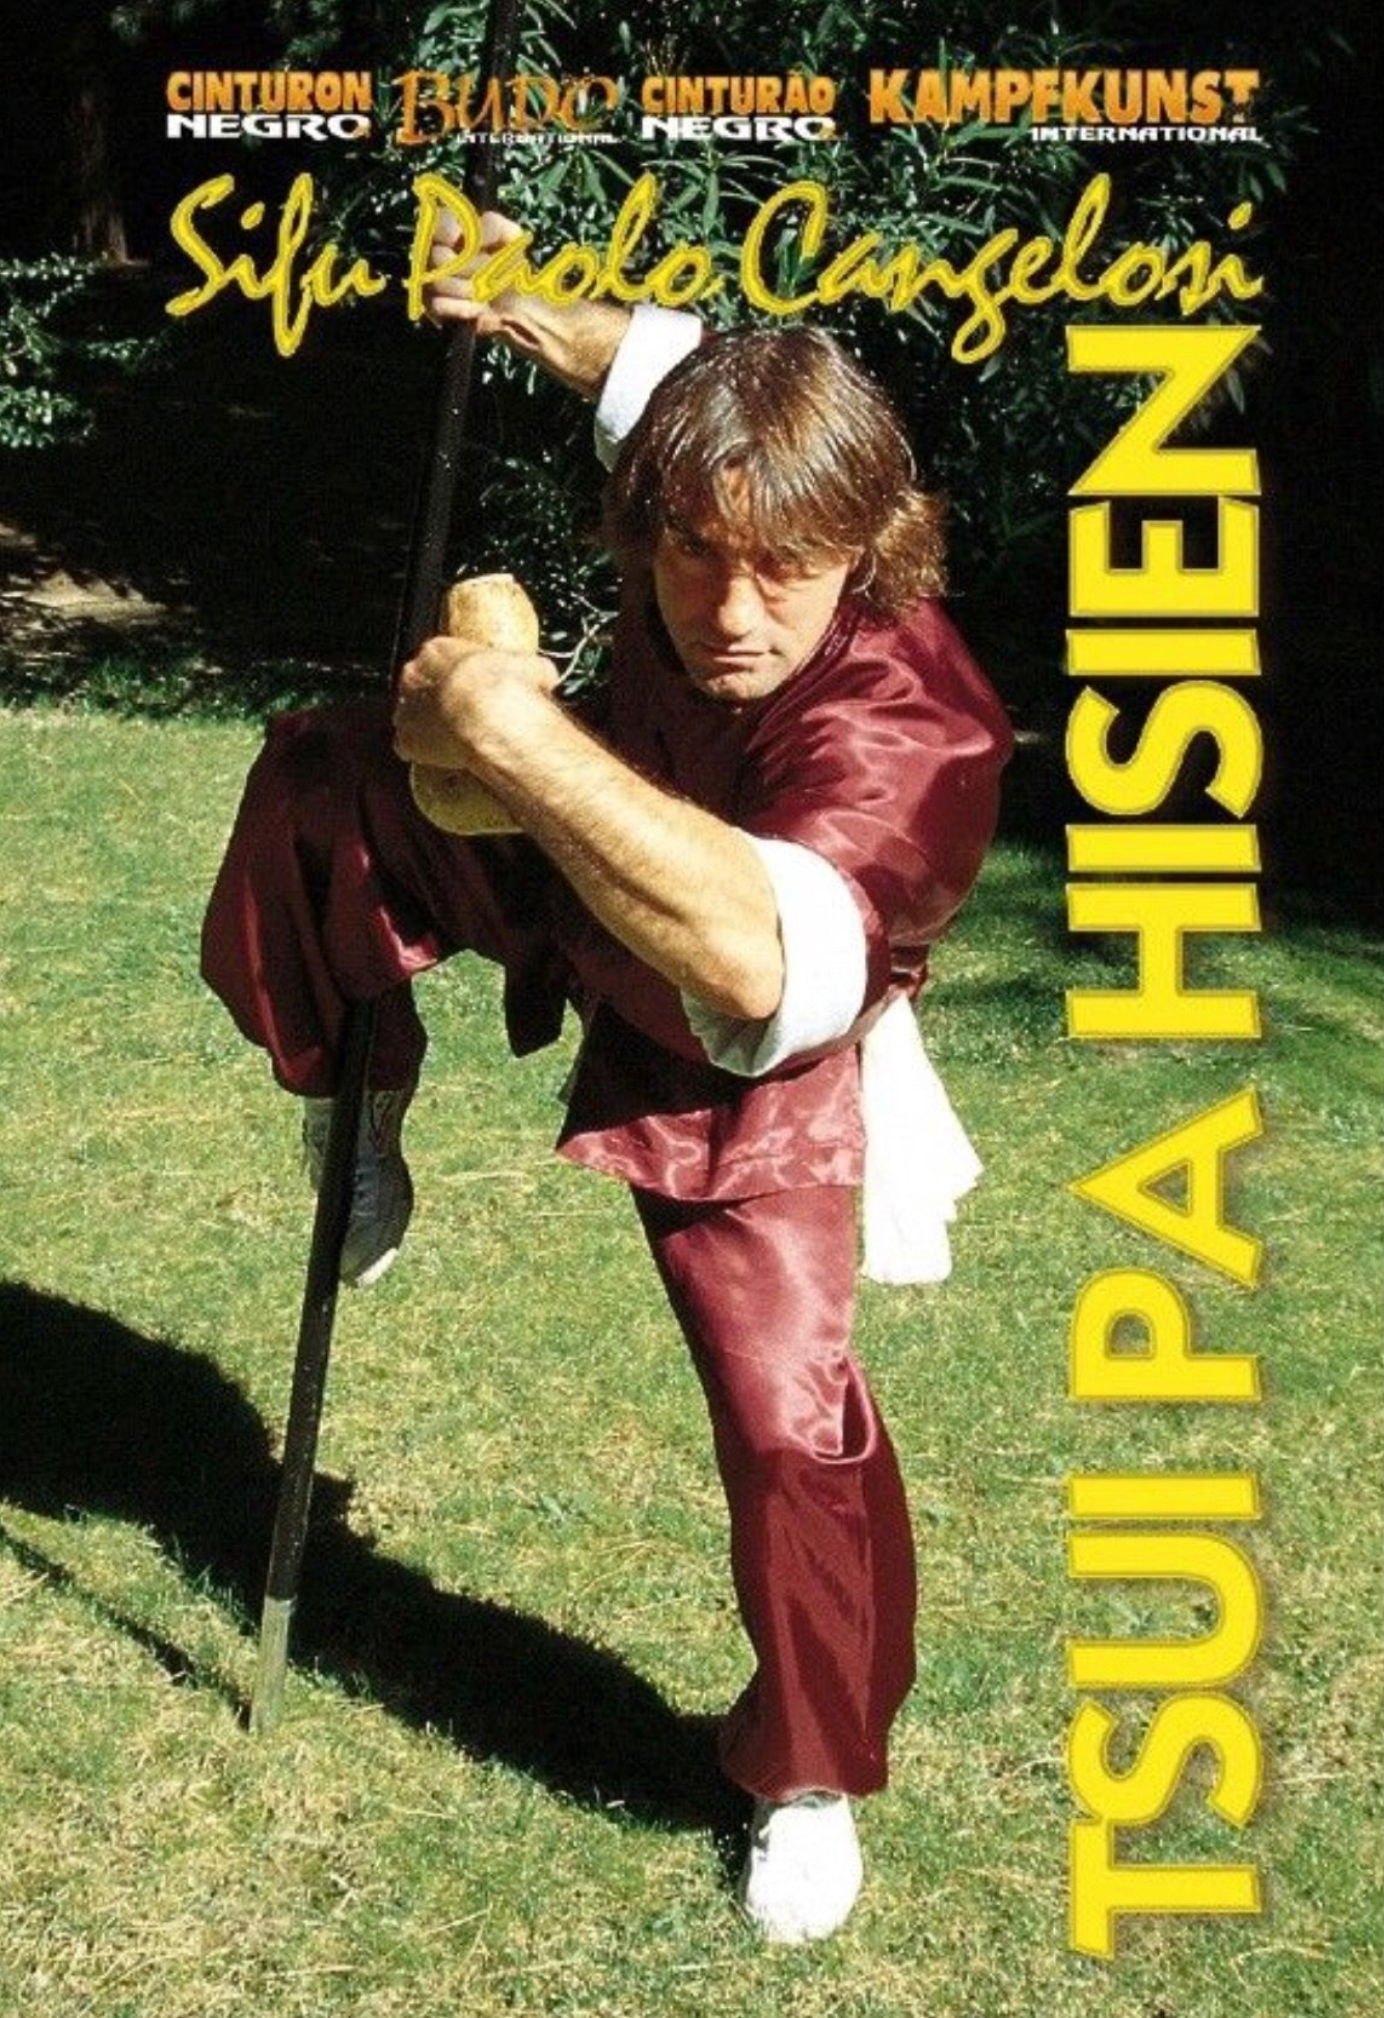 Tsui Pa Hsien Kung Fu Drunken Style DVD with Paolo Cangelosi - Budovideos Inc